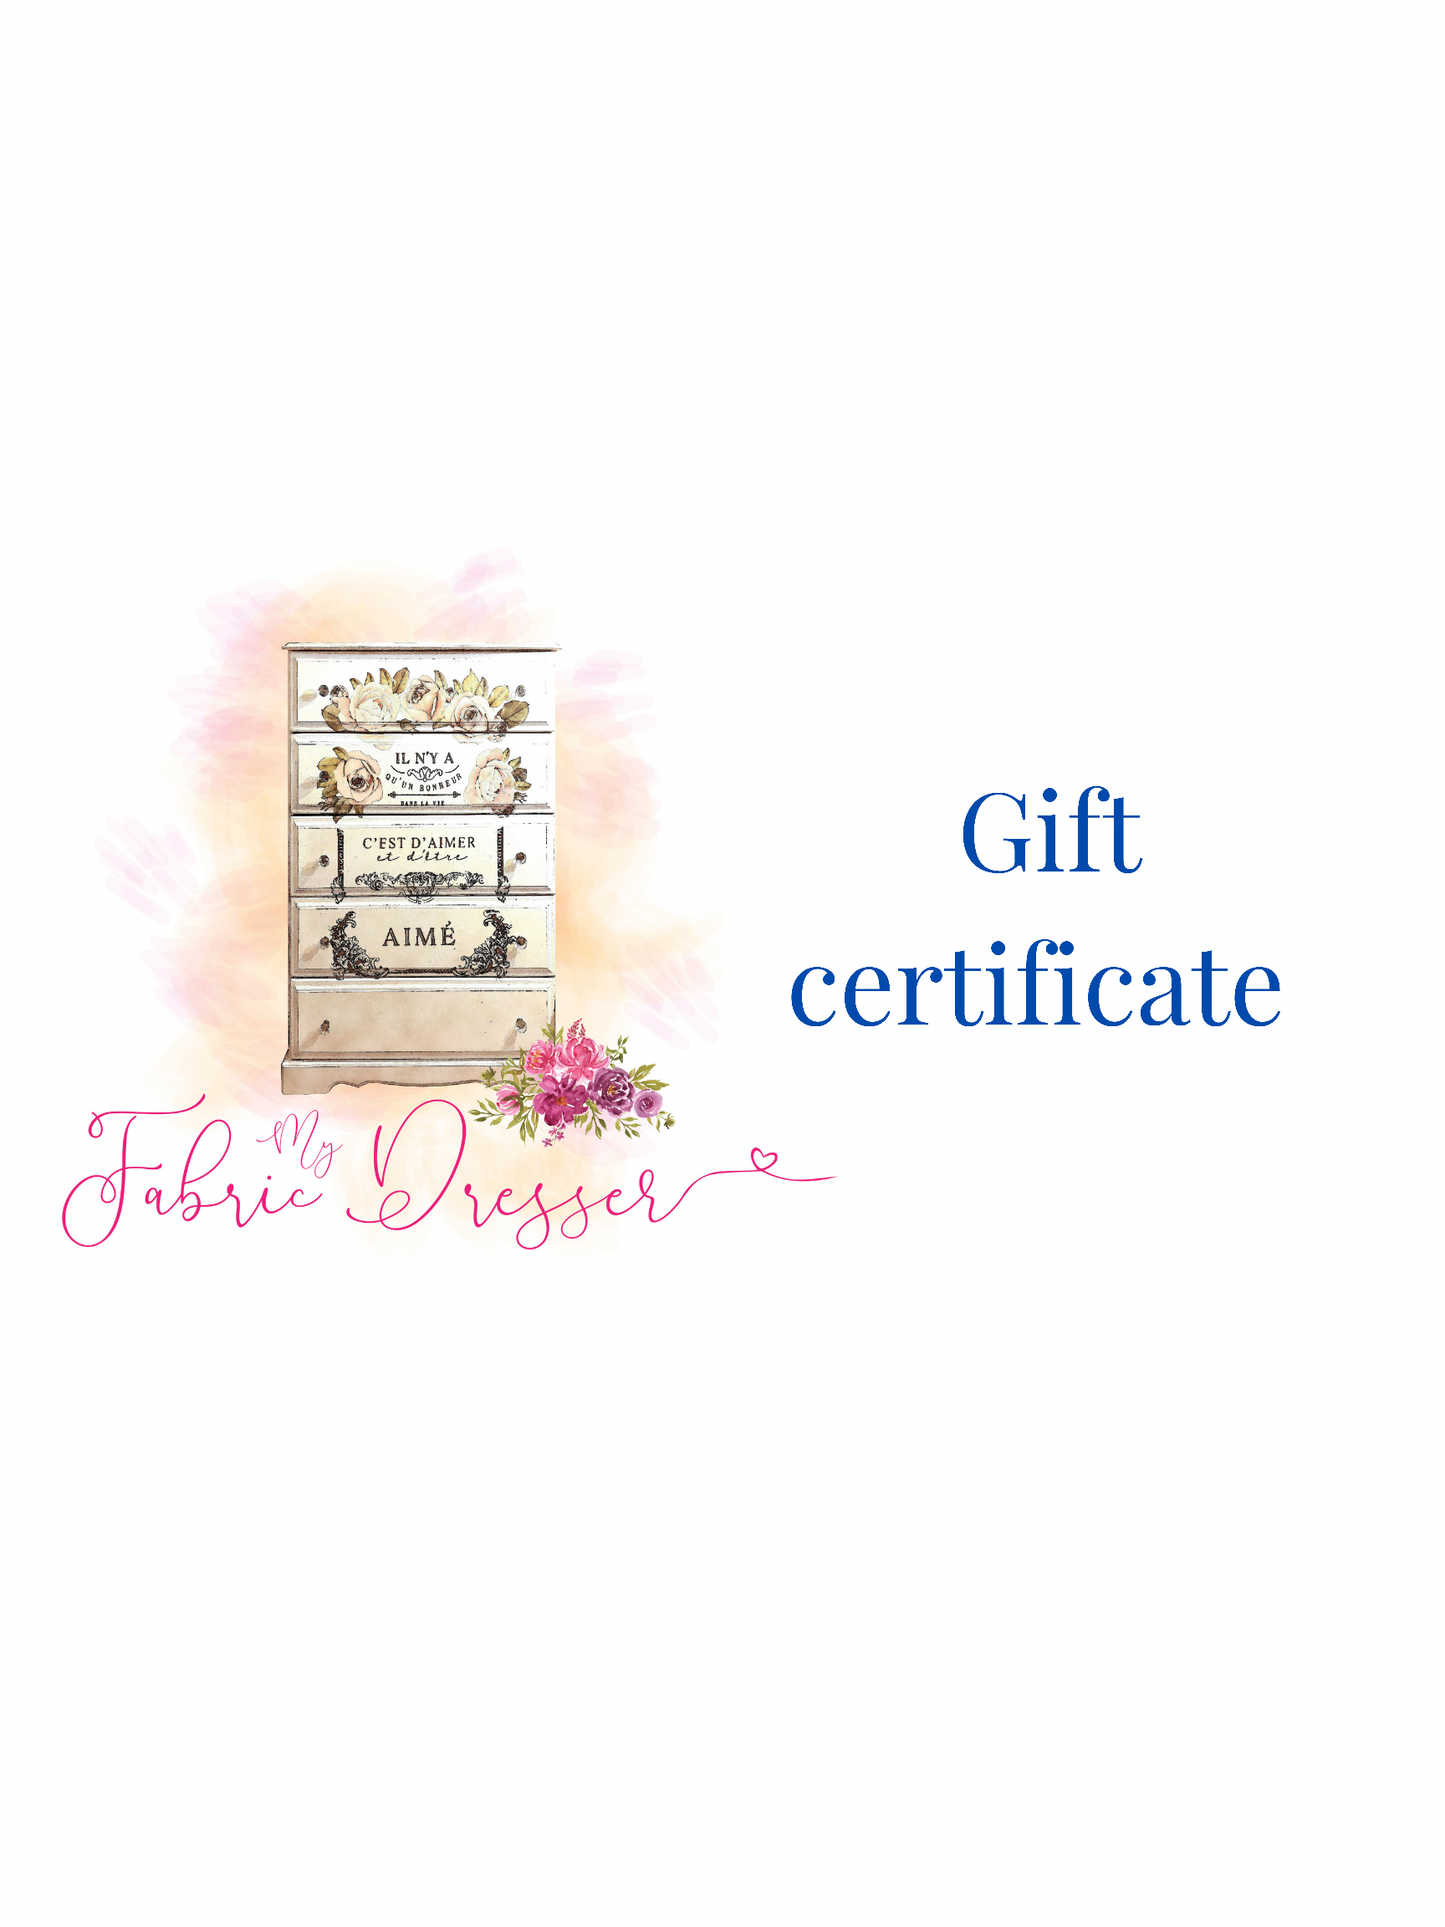 Electronic gift certificate